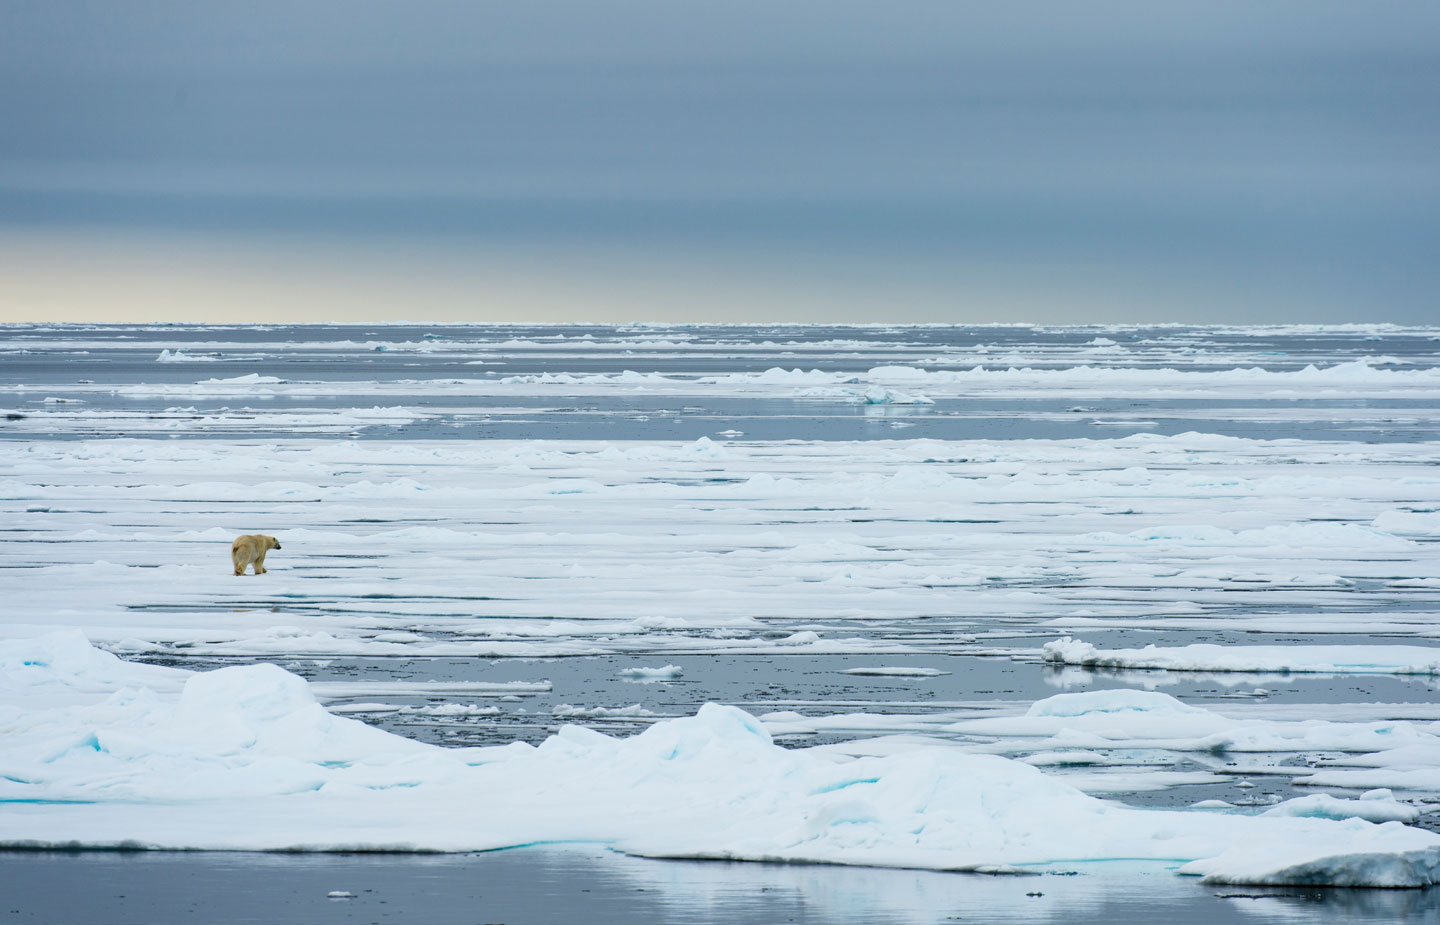 Expansive of view of icebergs in the Arctic with polar bear